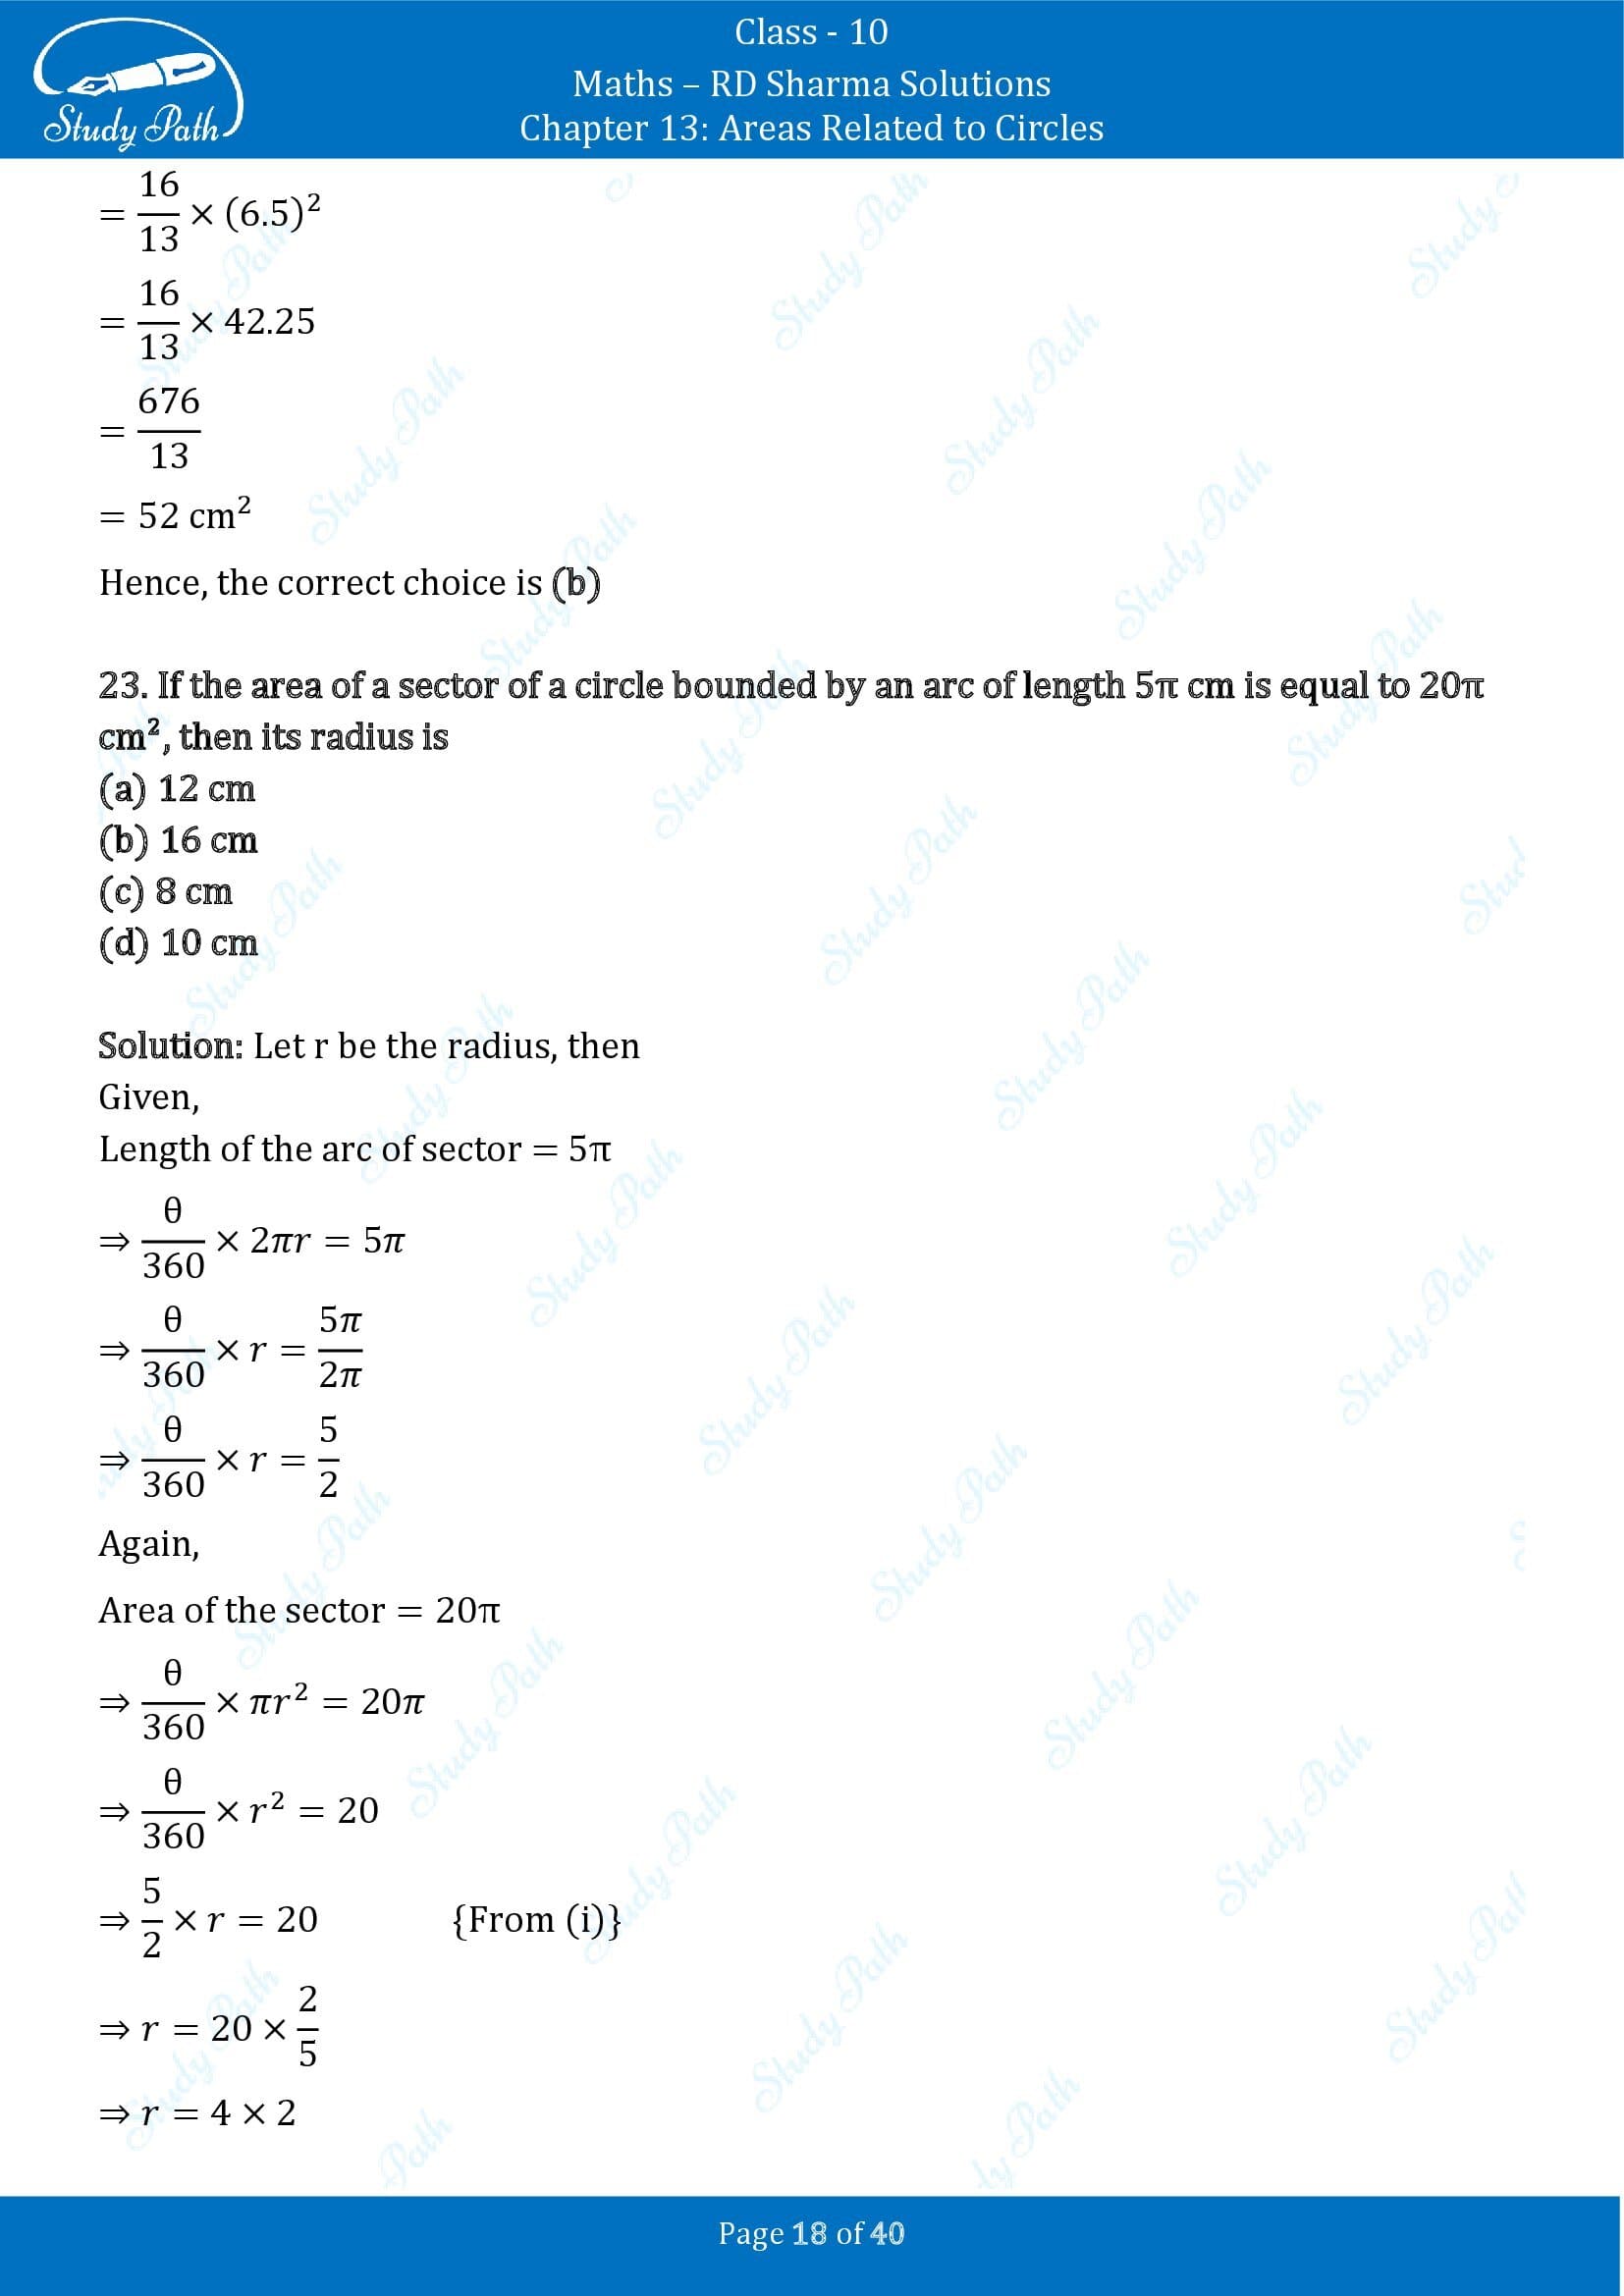 RD Sharma Solutions Class 10 Chapter 13 Areas Related to Circles Multiple Choice Question MCQs 00018